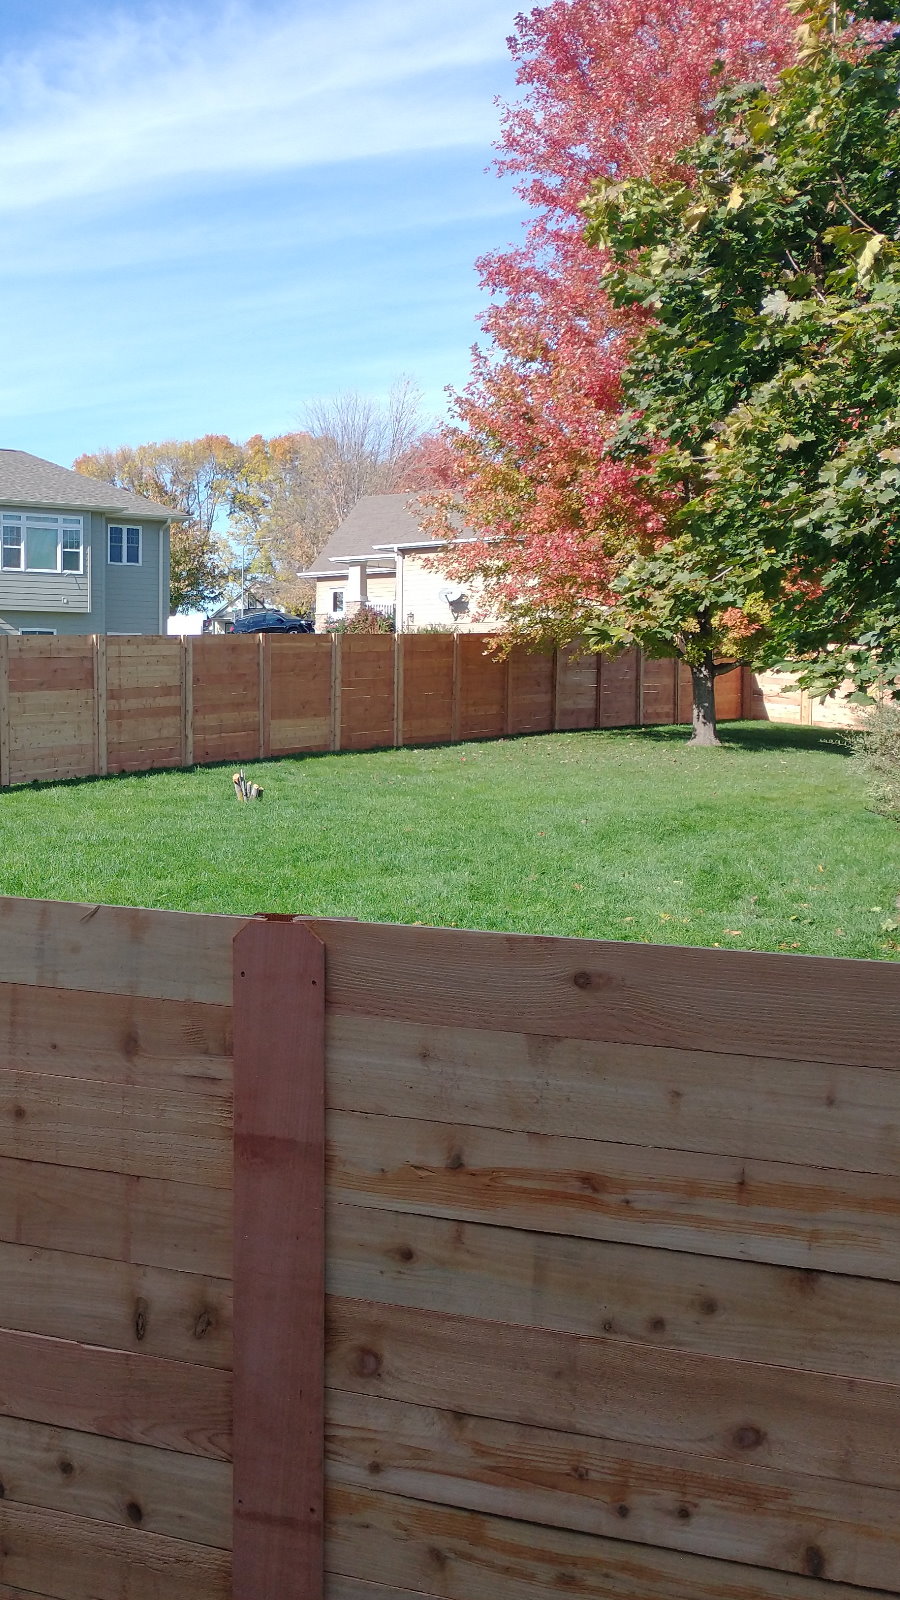 Wood fence styles that are popular in Elkhorn NE